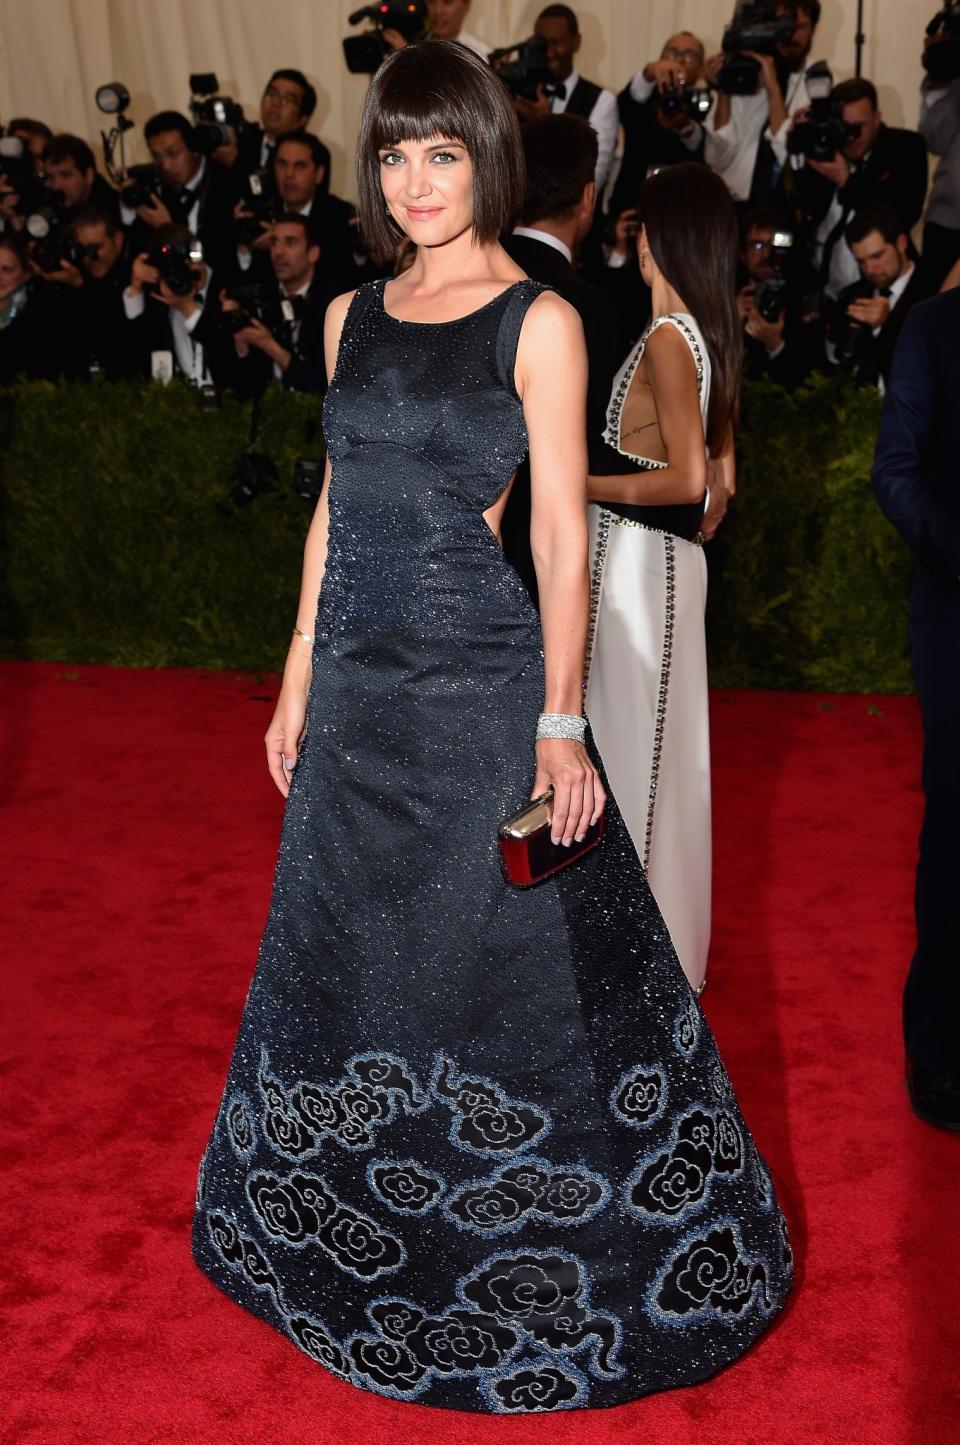 Katie Holmes at the 2015 Metropolitan Museum of Art’s Costume Institute benefit in New York City. (Photo: Getty Images)